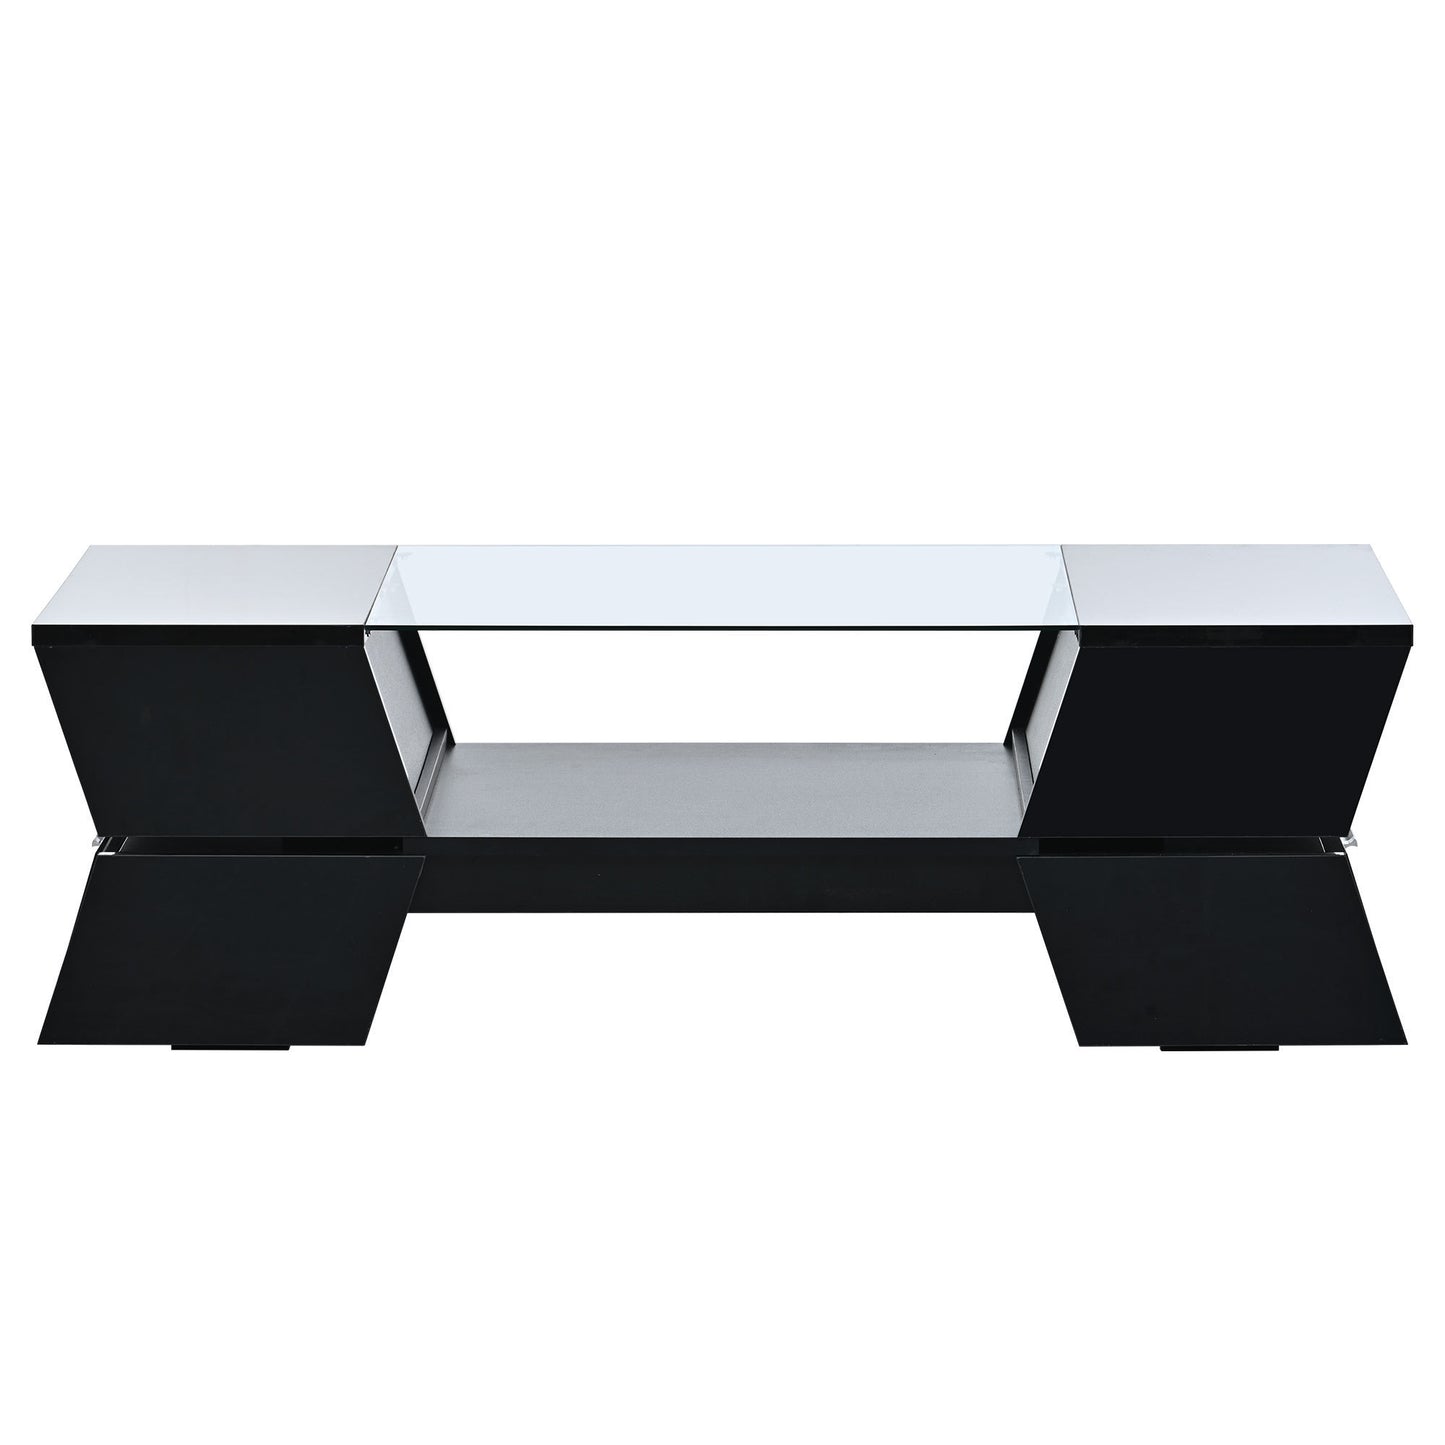 Modernist 2-Tier Glass Coffee Table with Storage Shelves and Cabinets, Contemporary Black Center Table for Living Room